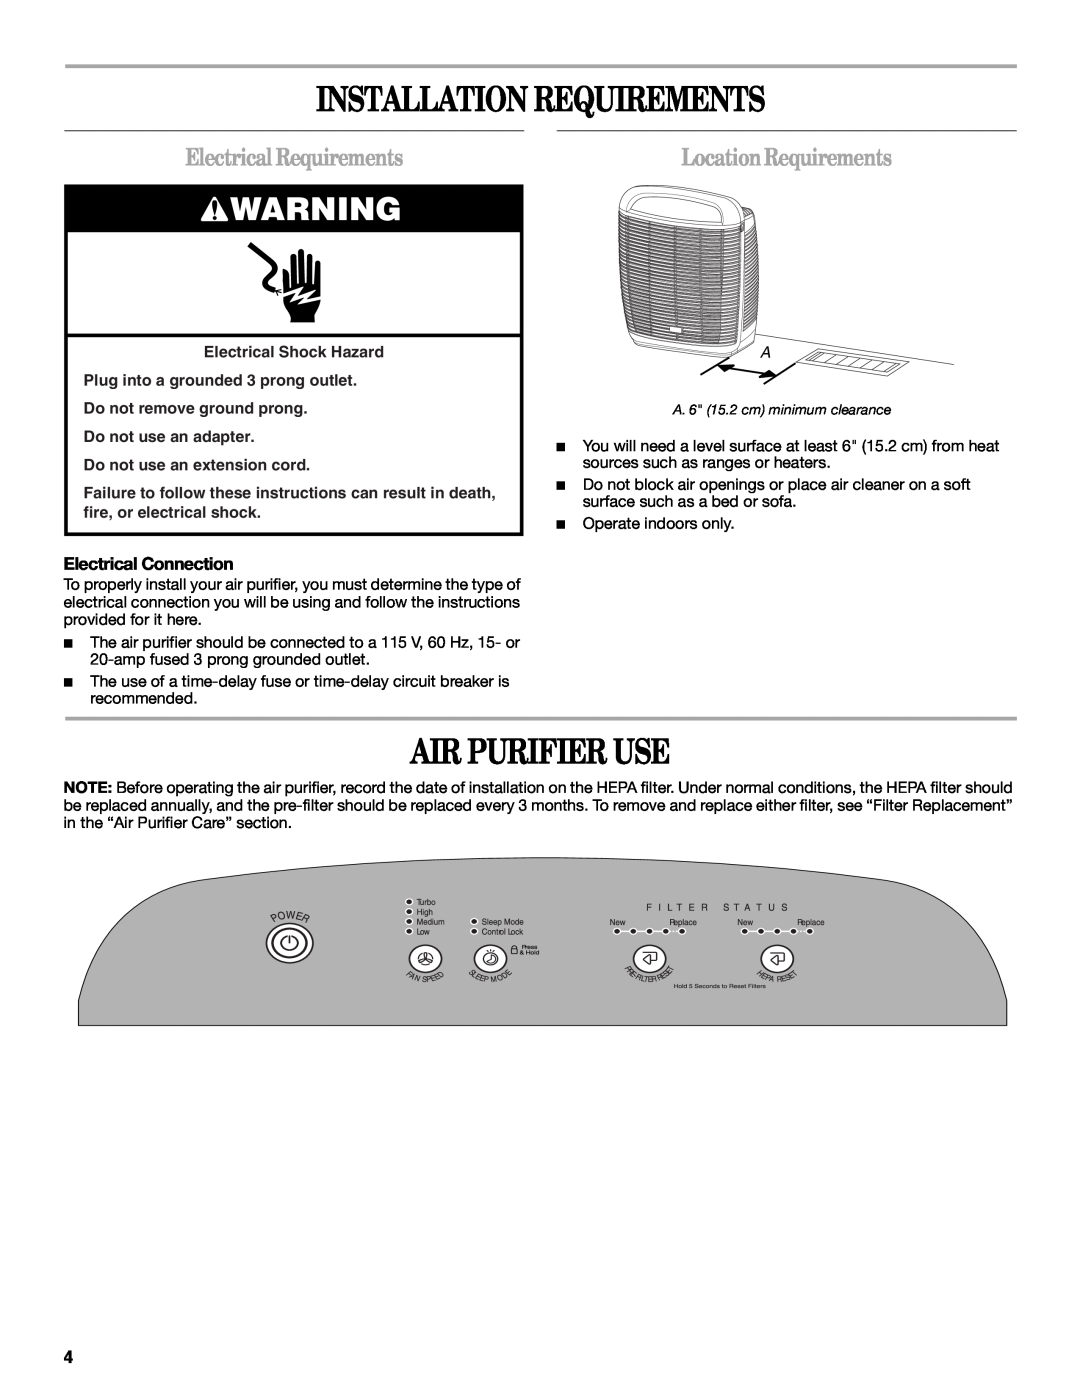 Maytag MT-AP510 manual Installation Requirements, Air Purifier Use, Electrical Requirements, LocationRequirements 